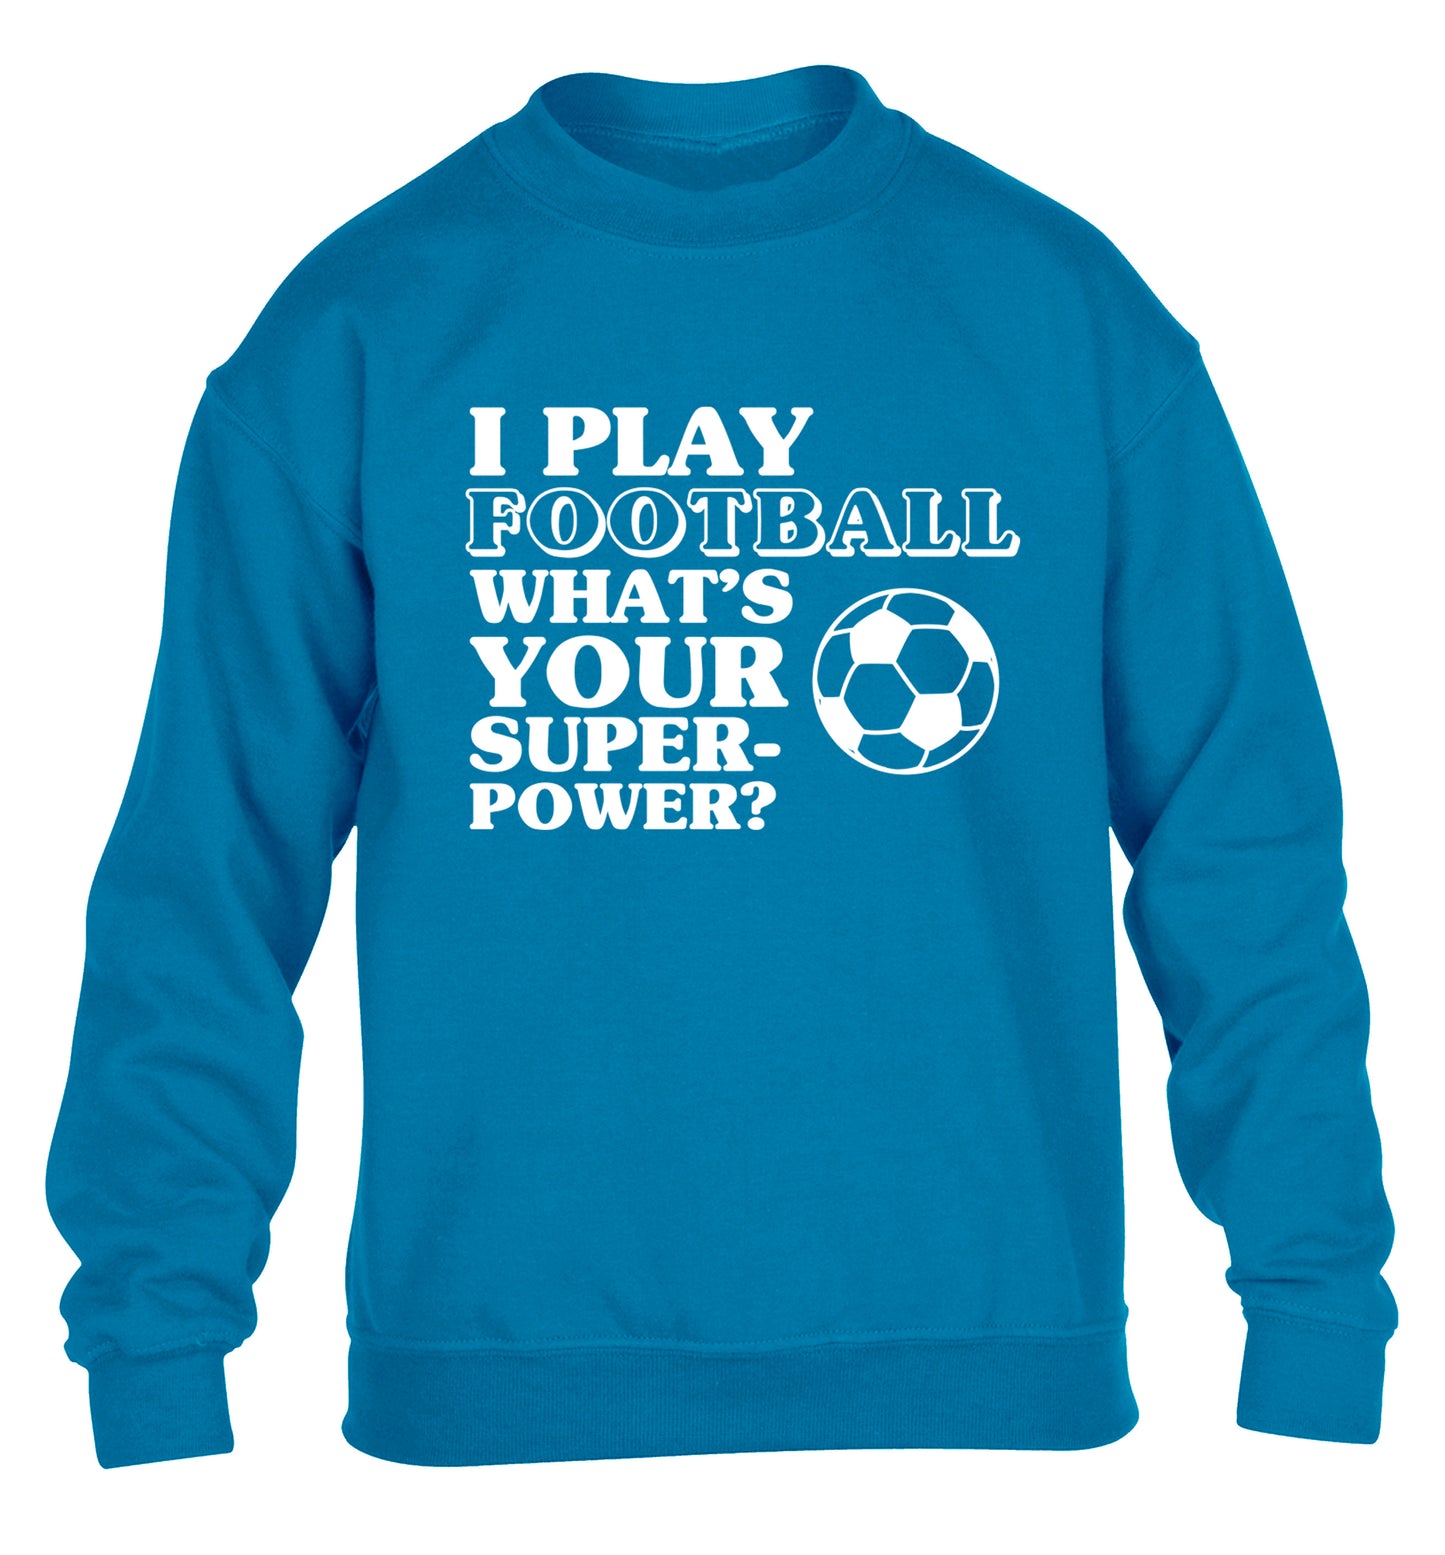 I play football what's your superpower? children's blue sweater 12-14 Years